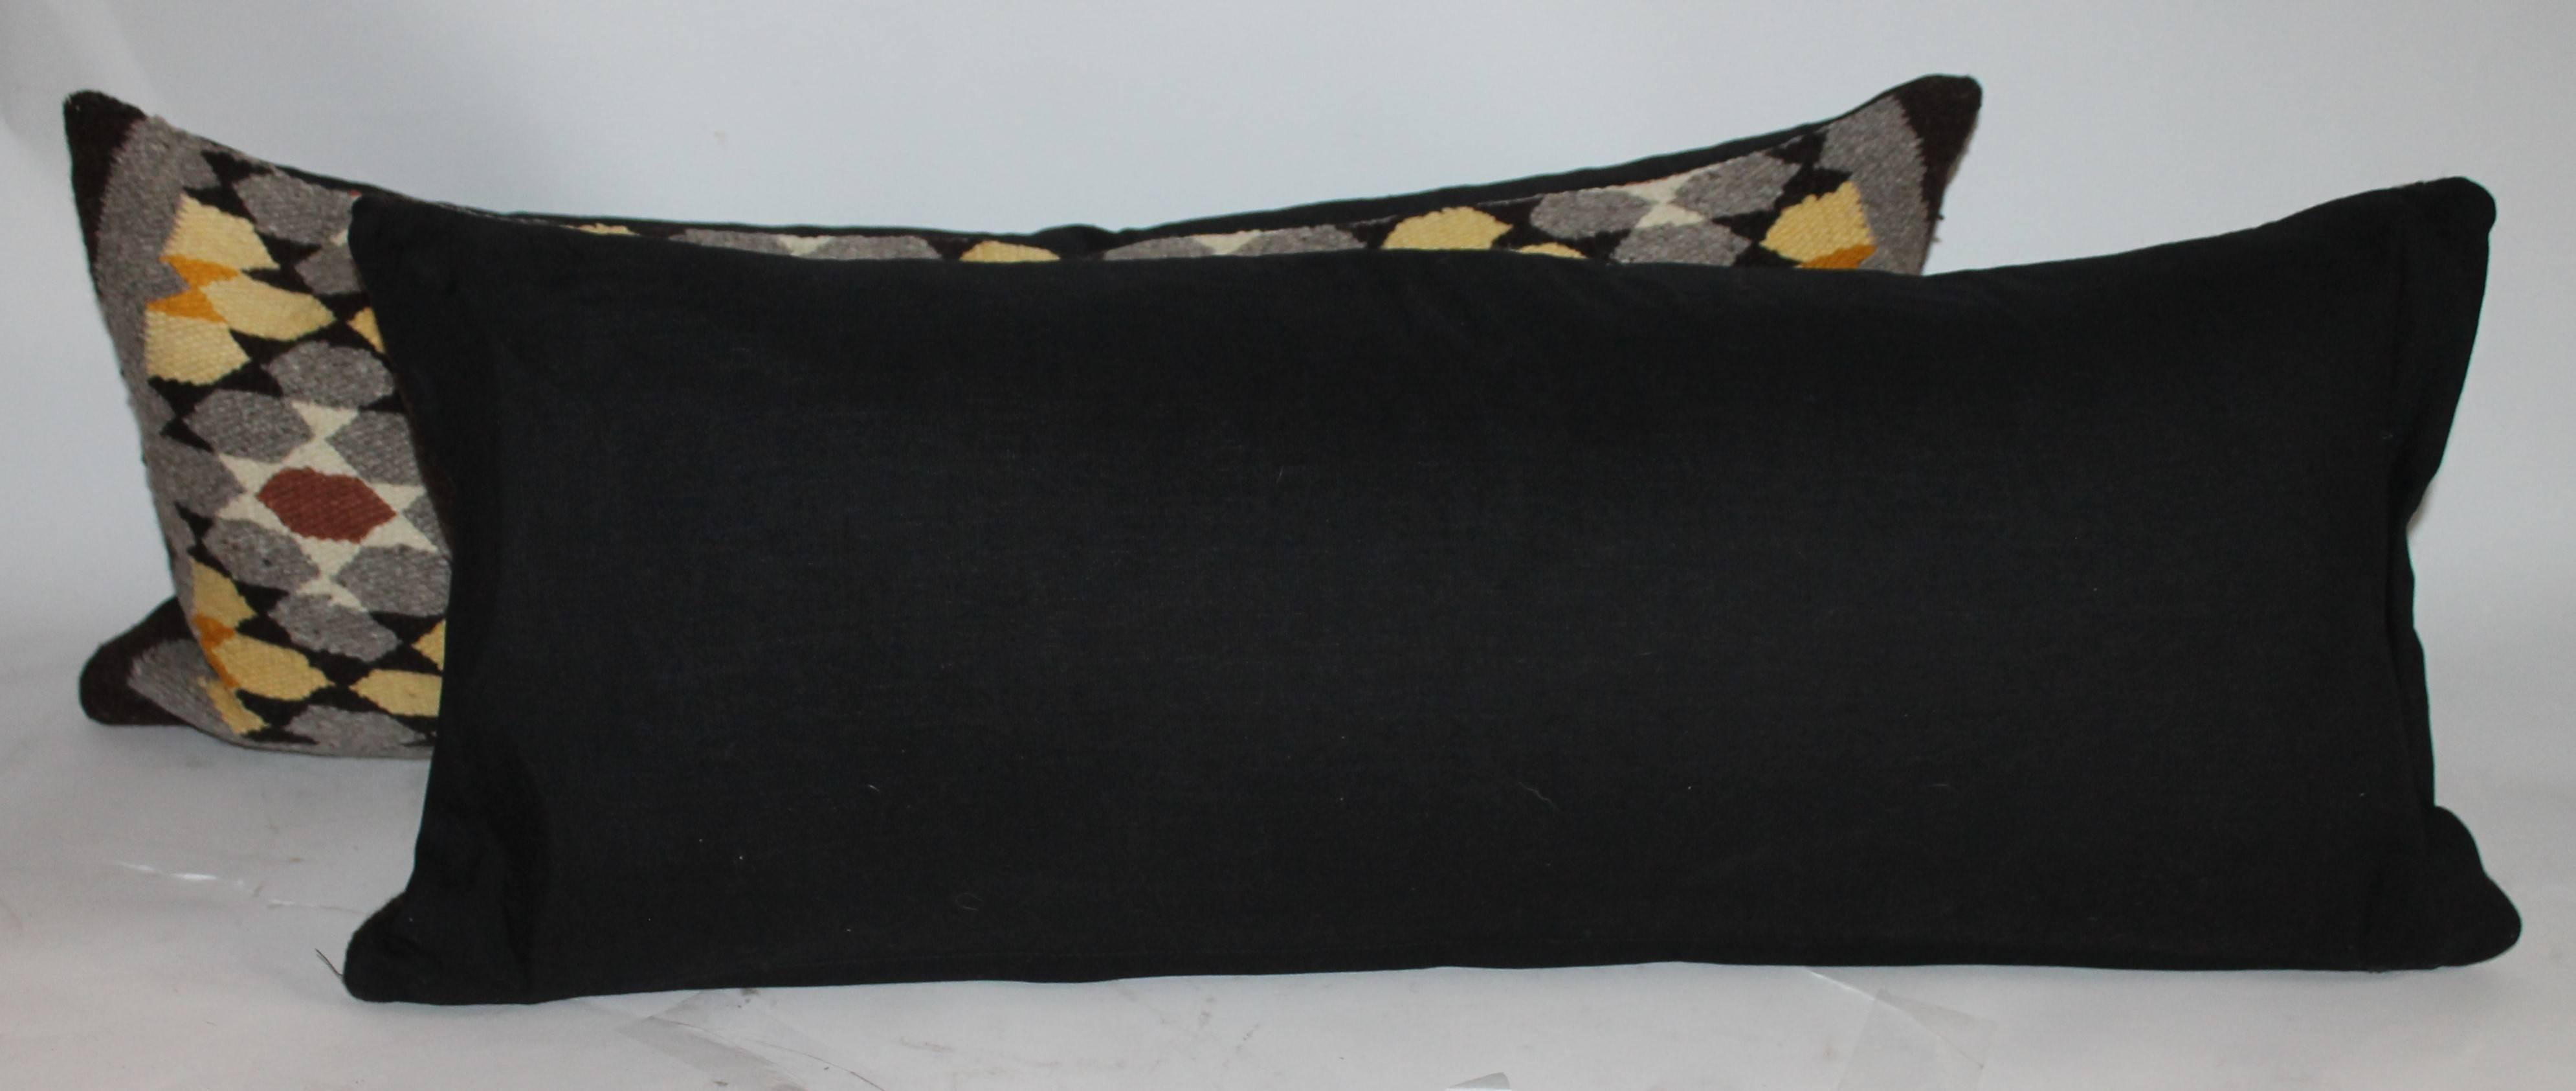 Navajo Indian Weaving Bolster Pillows, Two In Excellent Condition For Sale In Los Angeles, CA